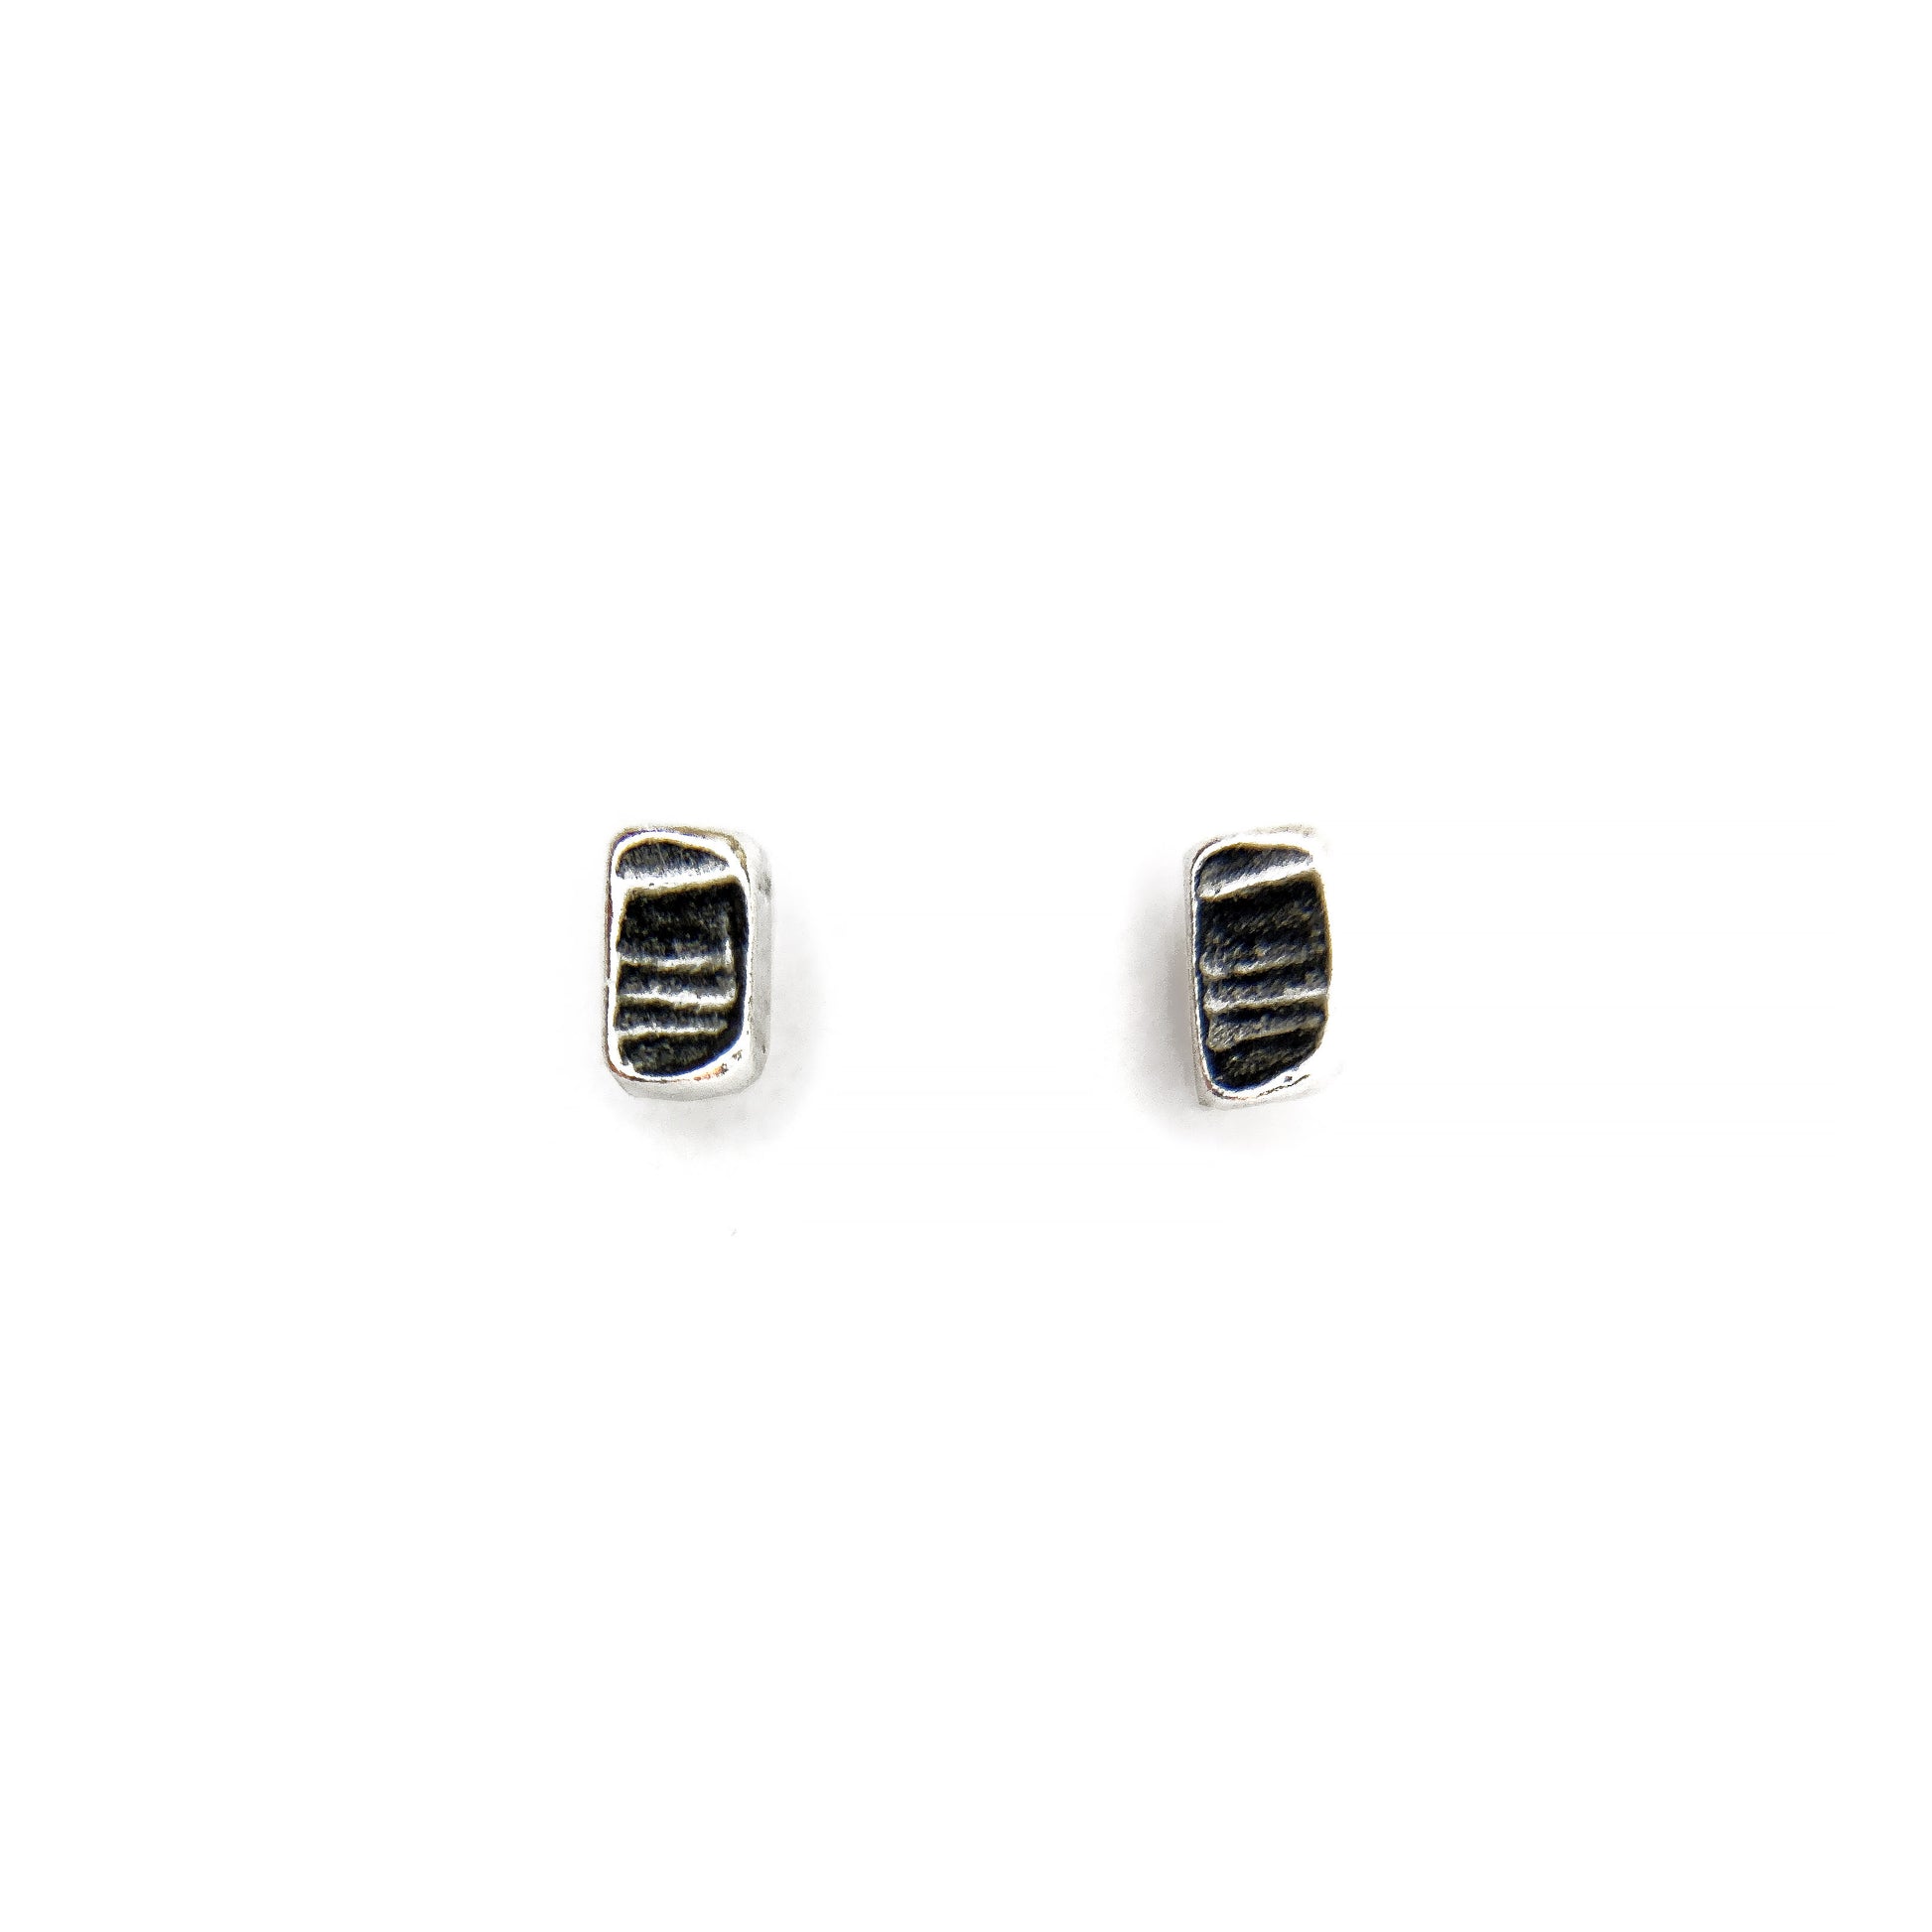 Two tiny silver textured stud earrings on a white background